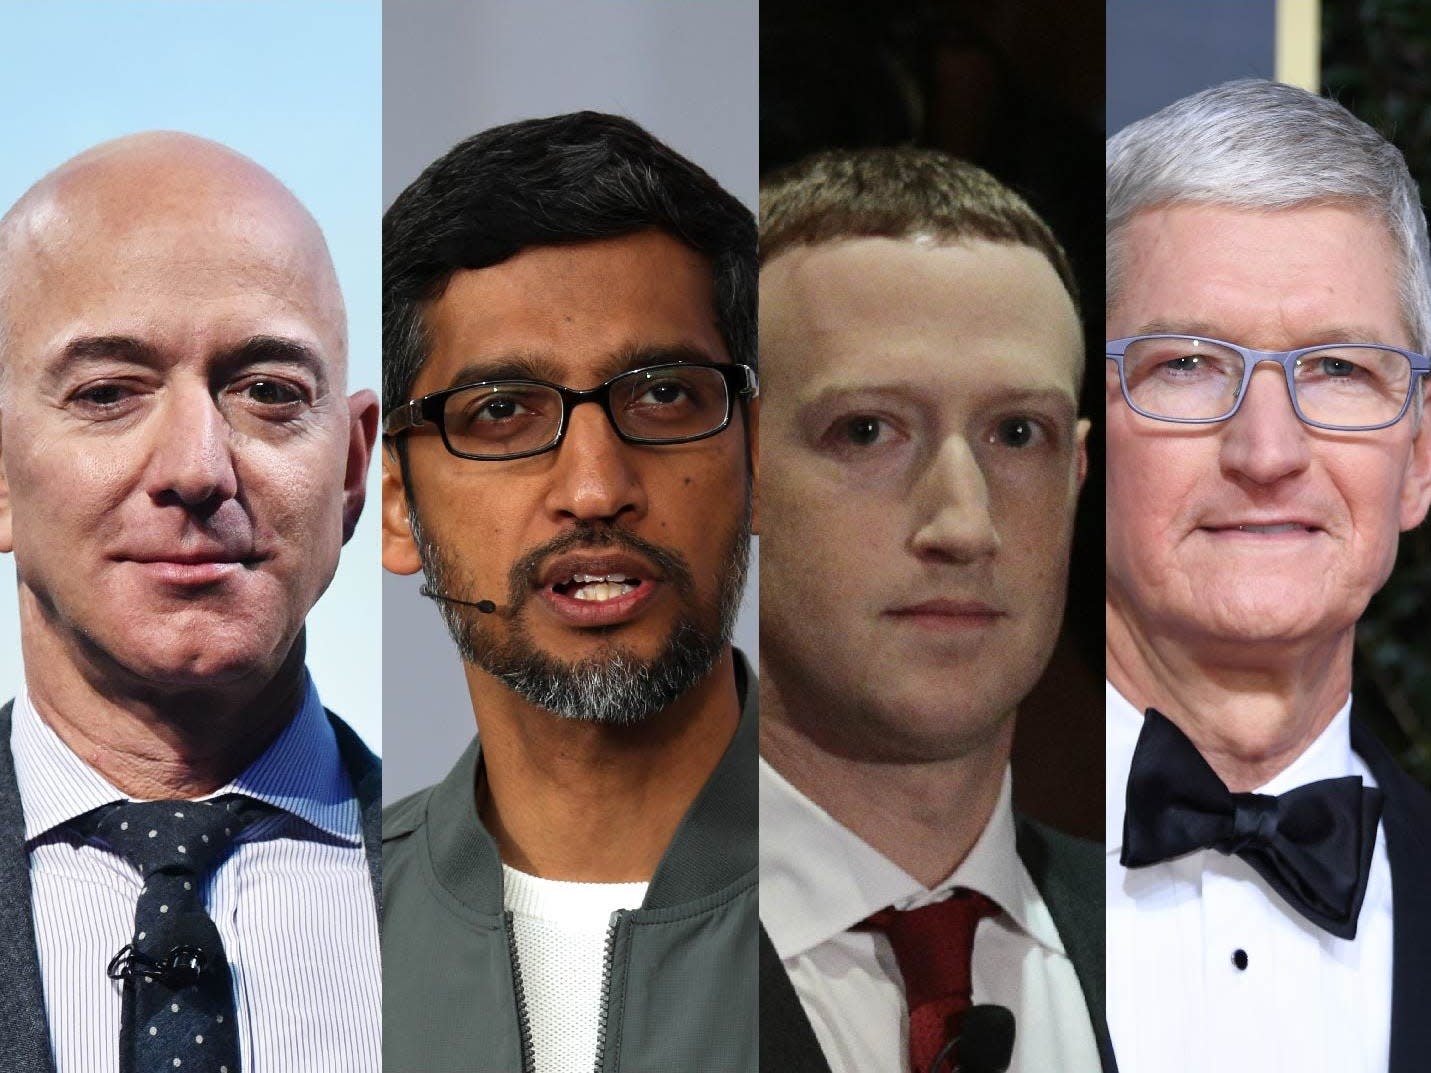 The leaders of the world’s most powerful tech companies including Apple, Amazon, and Google will be speaking in front of Congress this week. Here’s what we’re expecting and why it’s a huge deal.